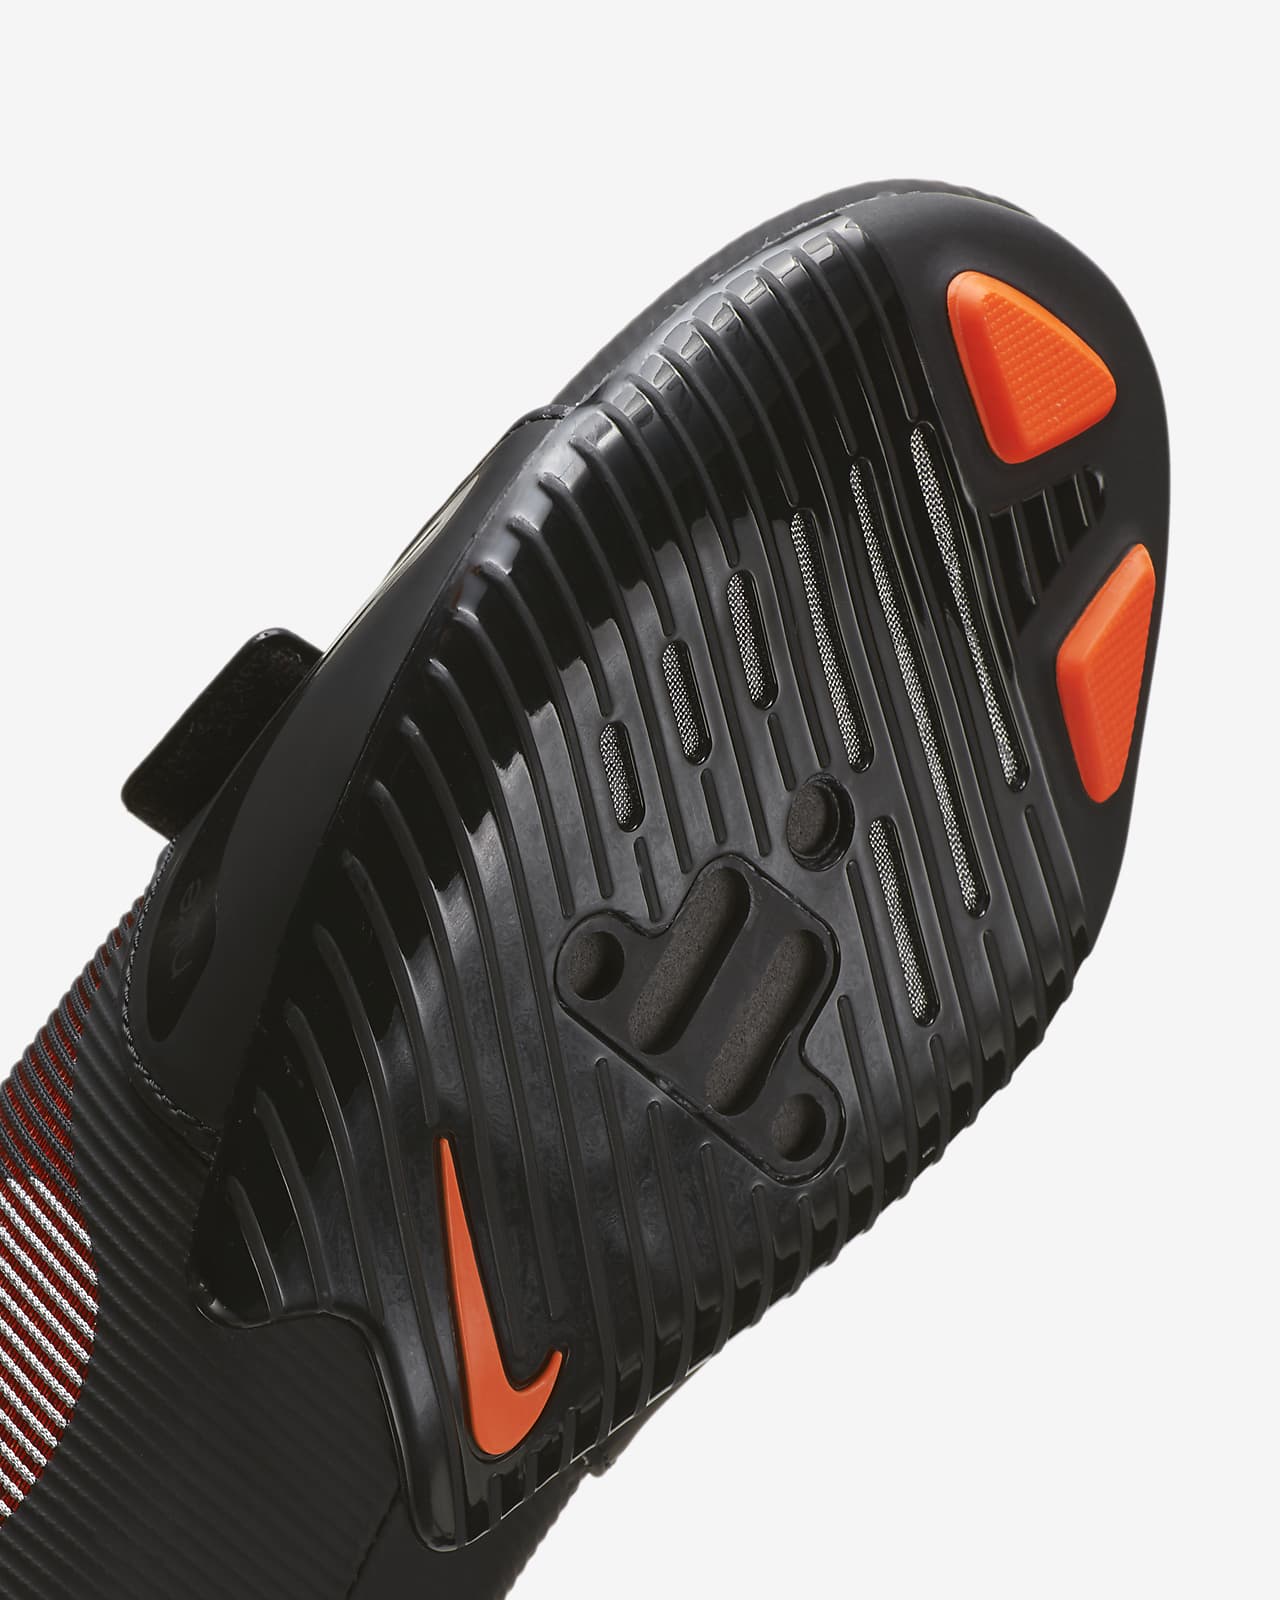 nike clipless shoes